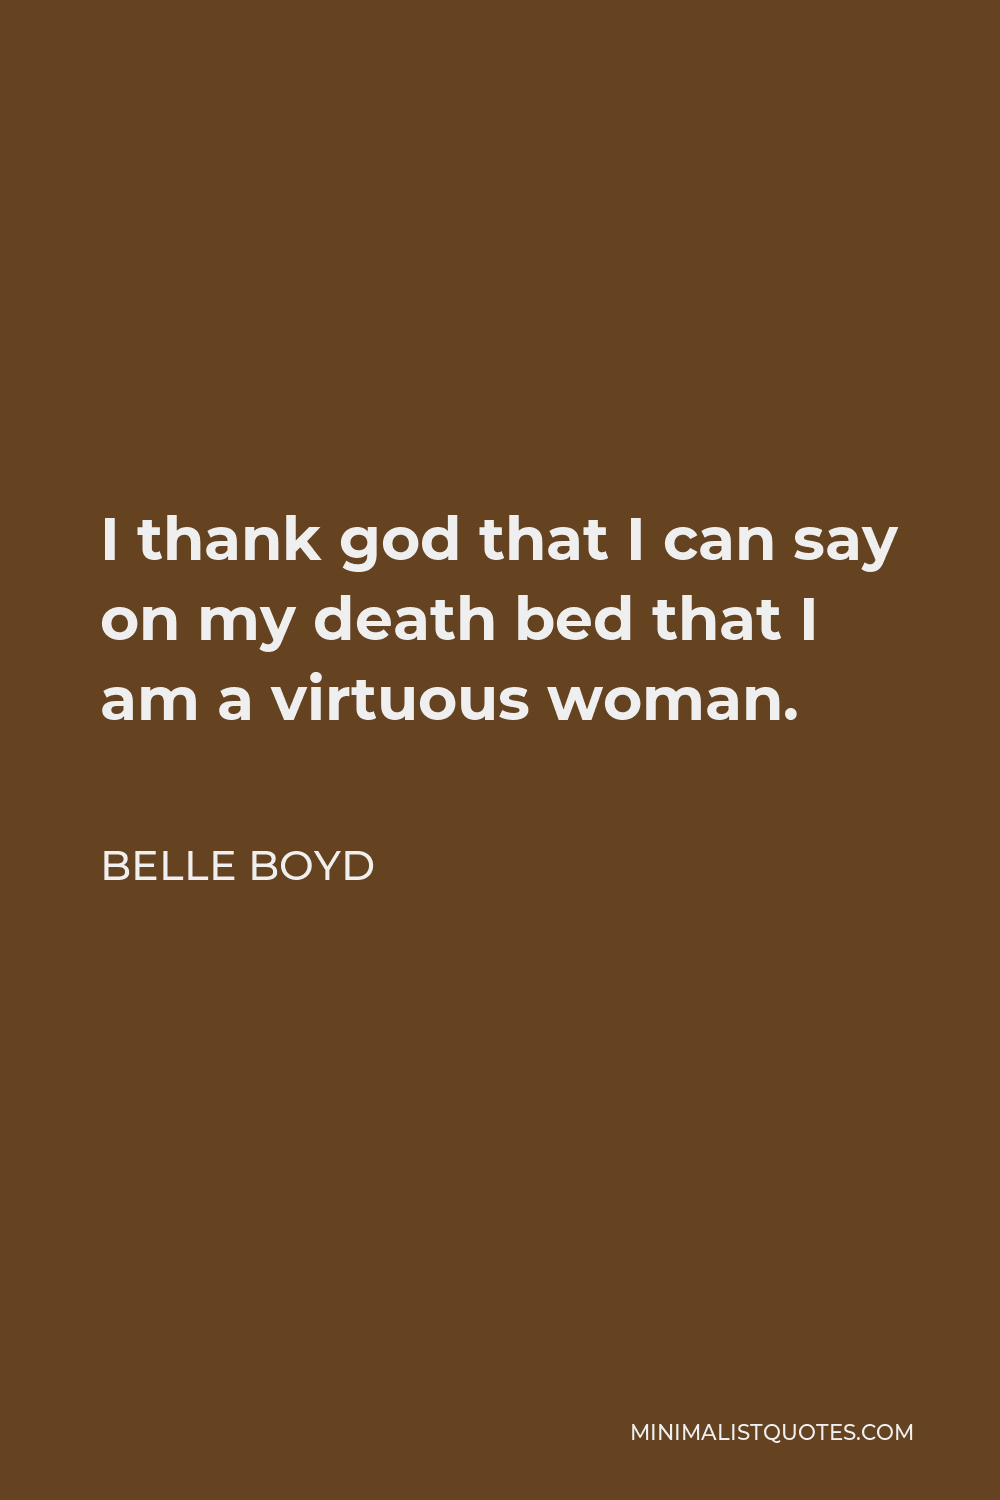 Belle Boyd Quote - I thank god that I can say on my death bed that I am a virtuous woman.